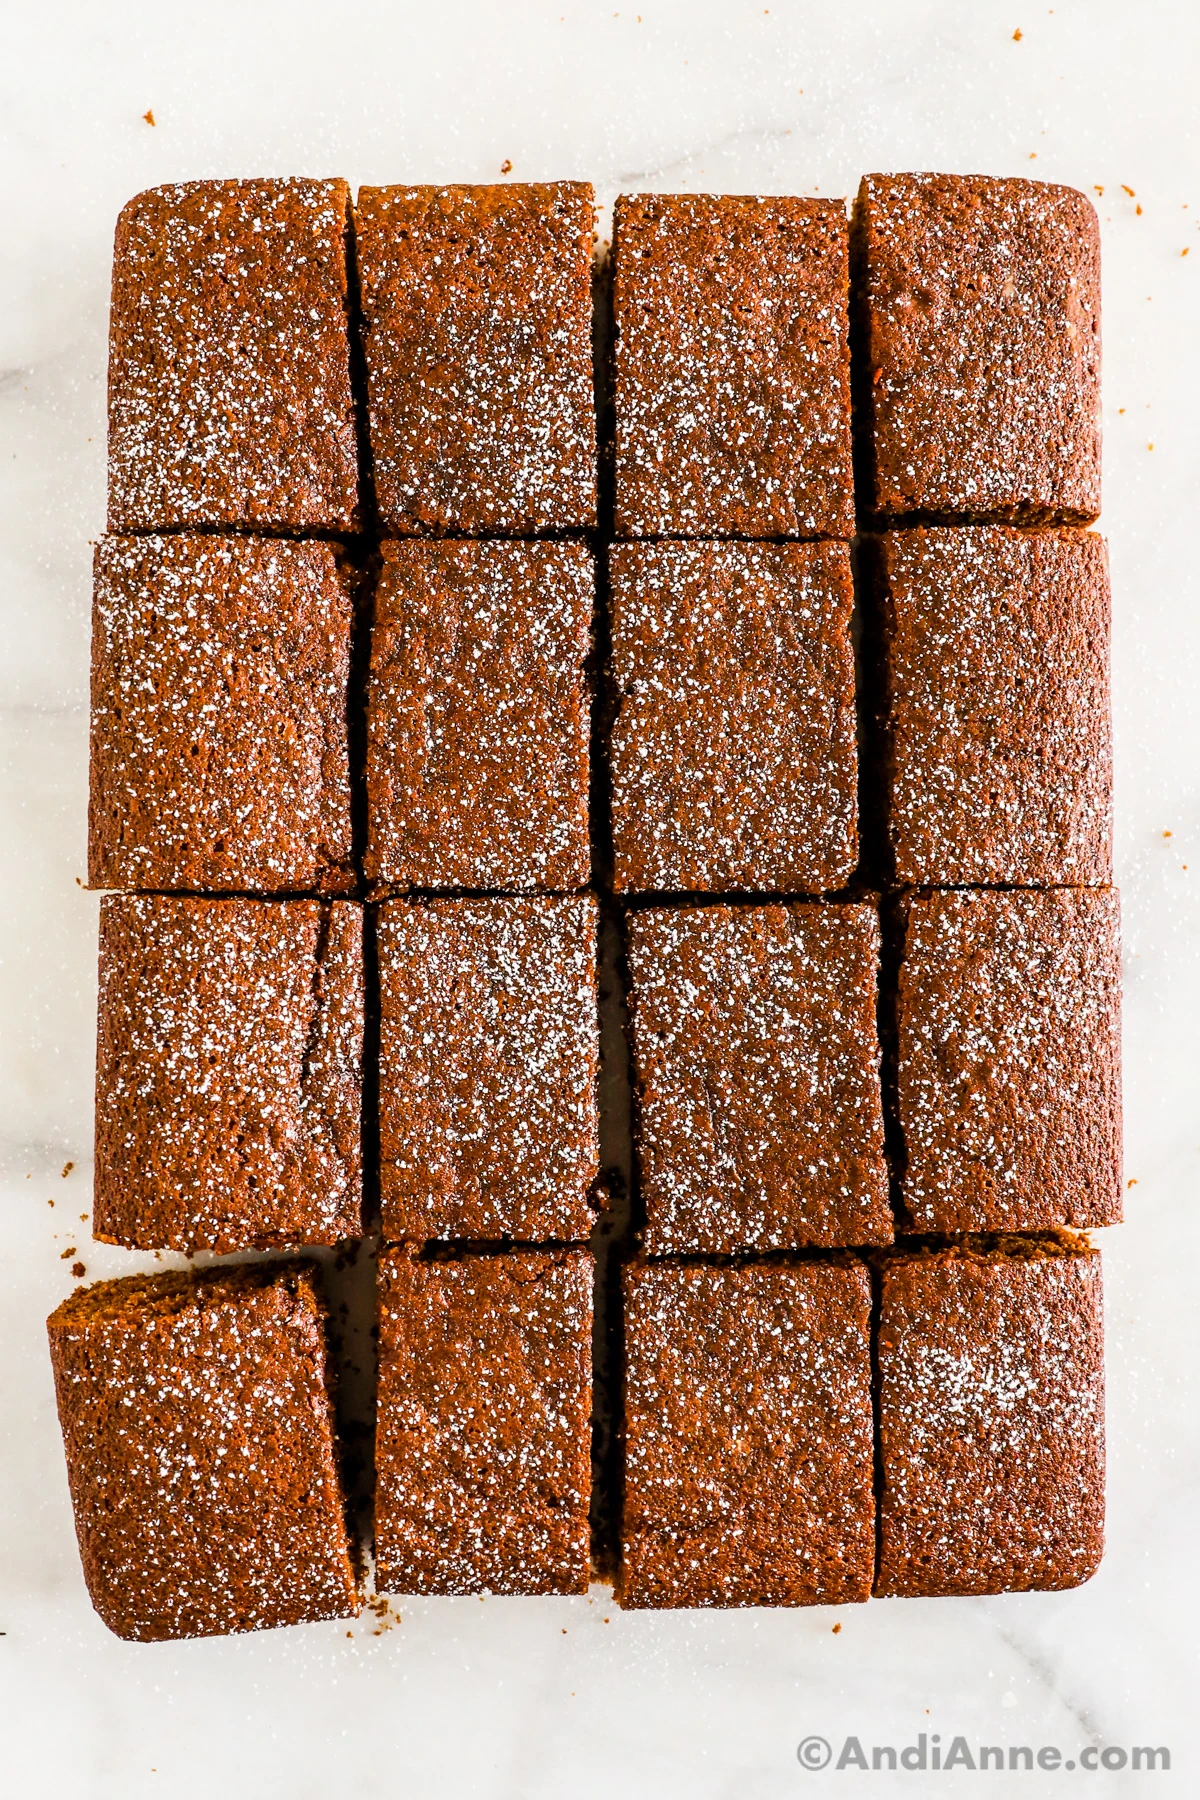 Slices of gingerbread cake lightly dusted with powdered sugar.